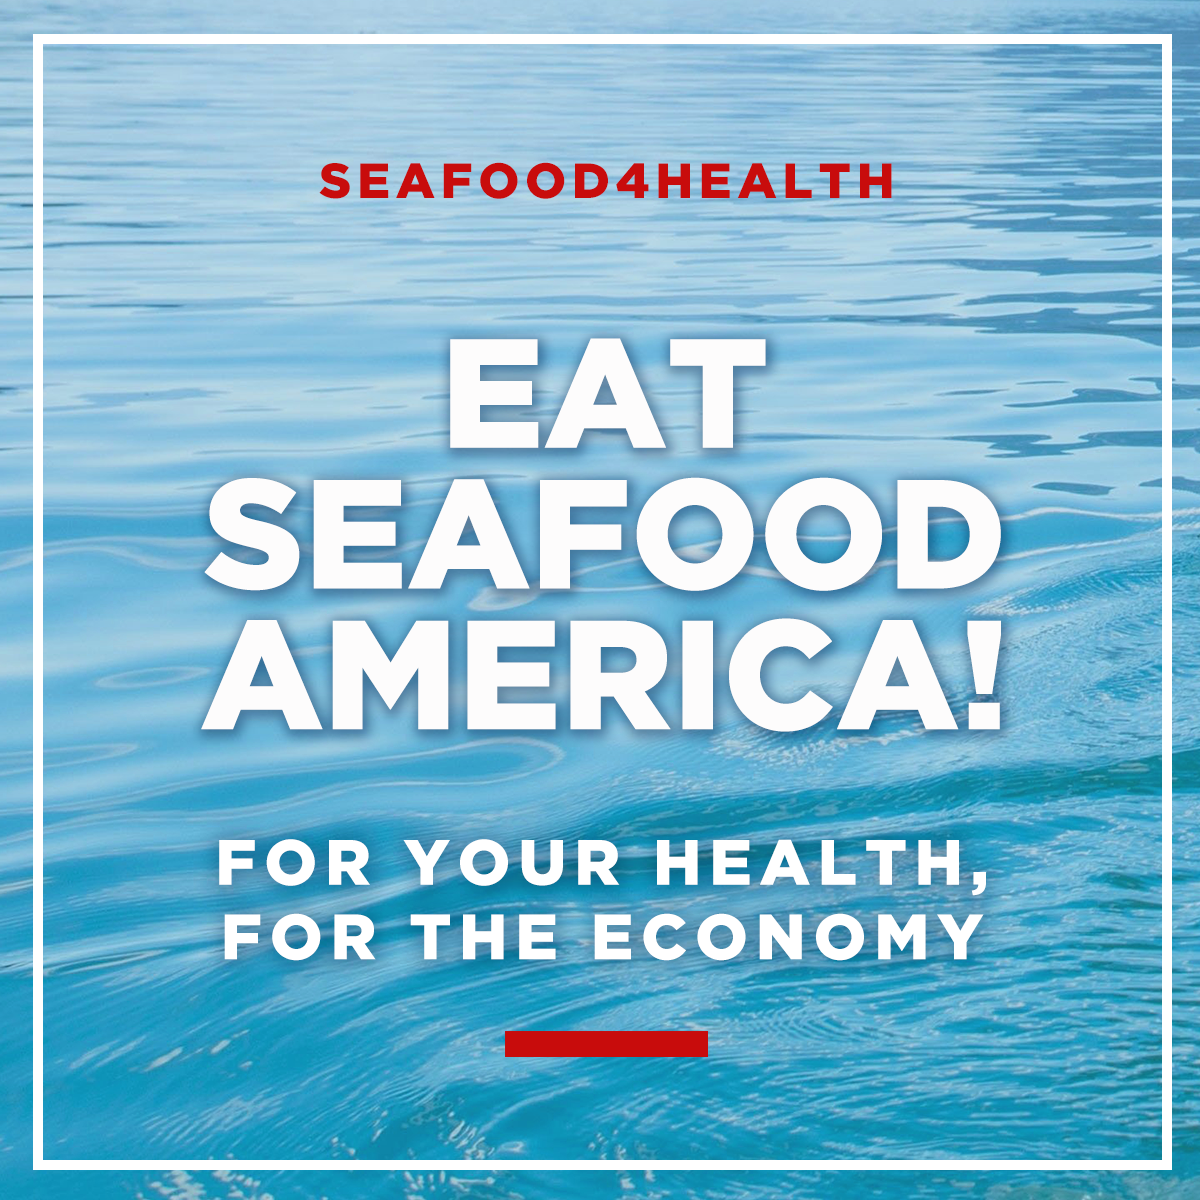 Eat Seafood America to Help 2 Million Jobs & Boost Health During COVID